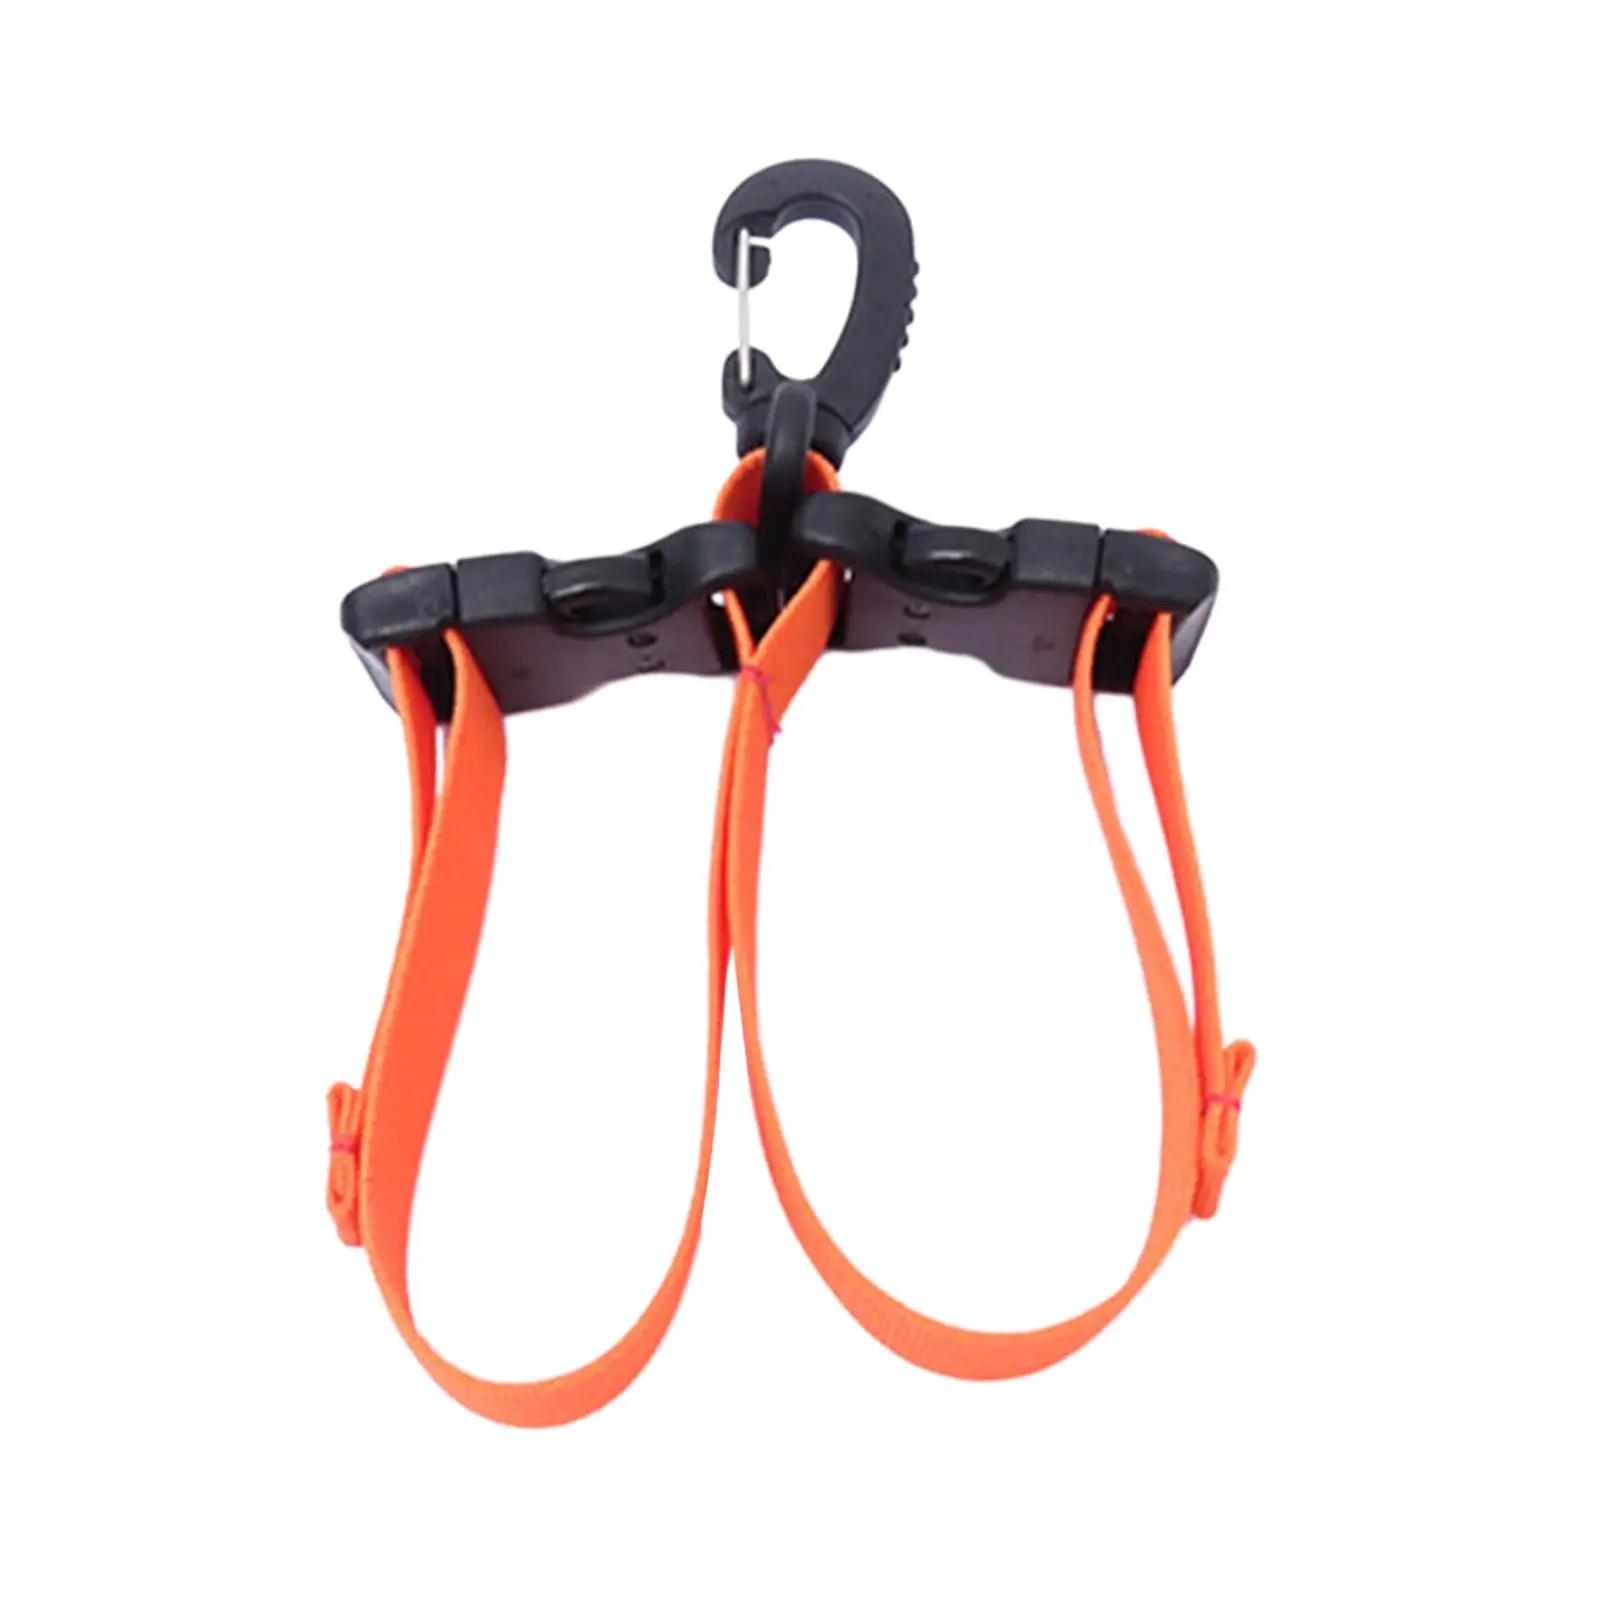 Diving fins Keeper Strap Quick Release Buckles, Swim Flippers Buckles Accessories, Diving Fins Strap for Snorkelling